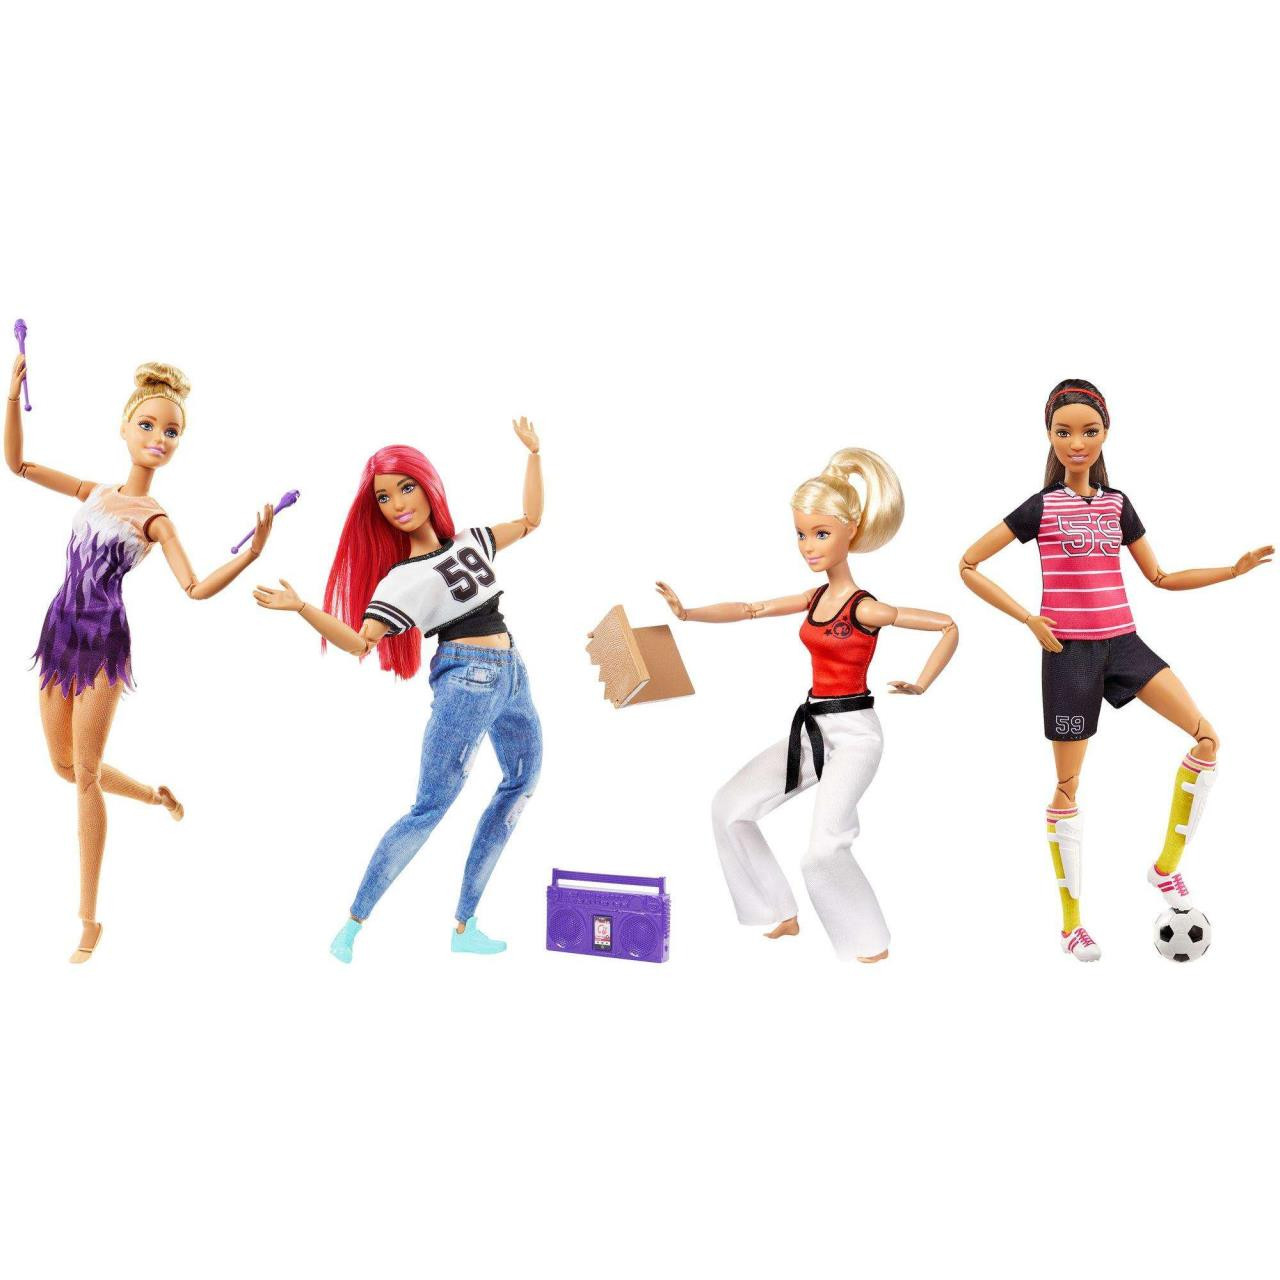 https://cdn11.bigcommerce.com/s-gemsyzzxez/images/stencil/1280x1280/products/8247/50685/Assorted-Barbie-Made-To-Move-Dolls-887961368178_image2__90572.1665165360.jpg?c=1